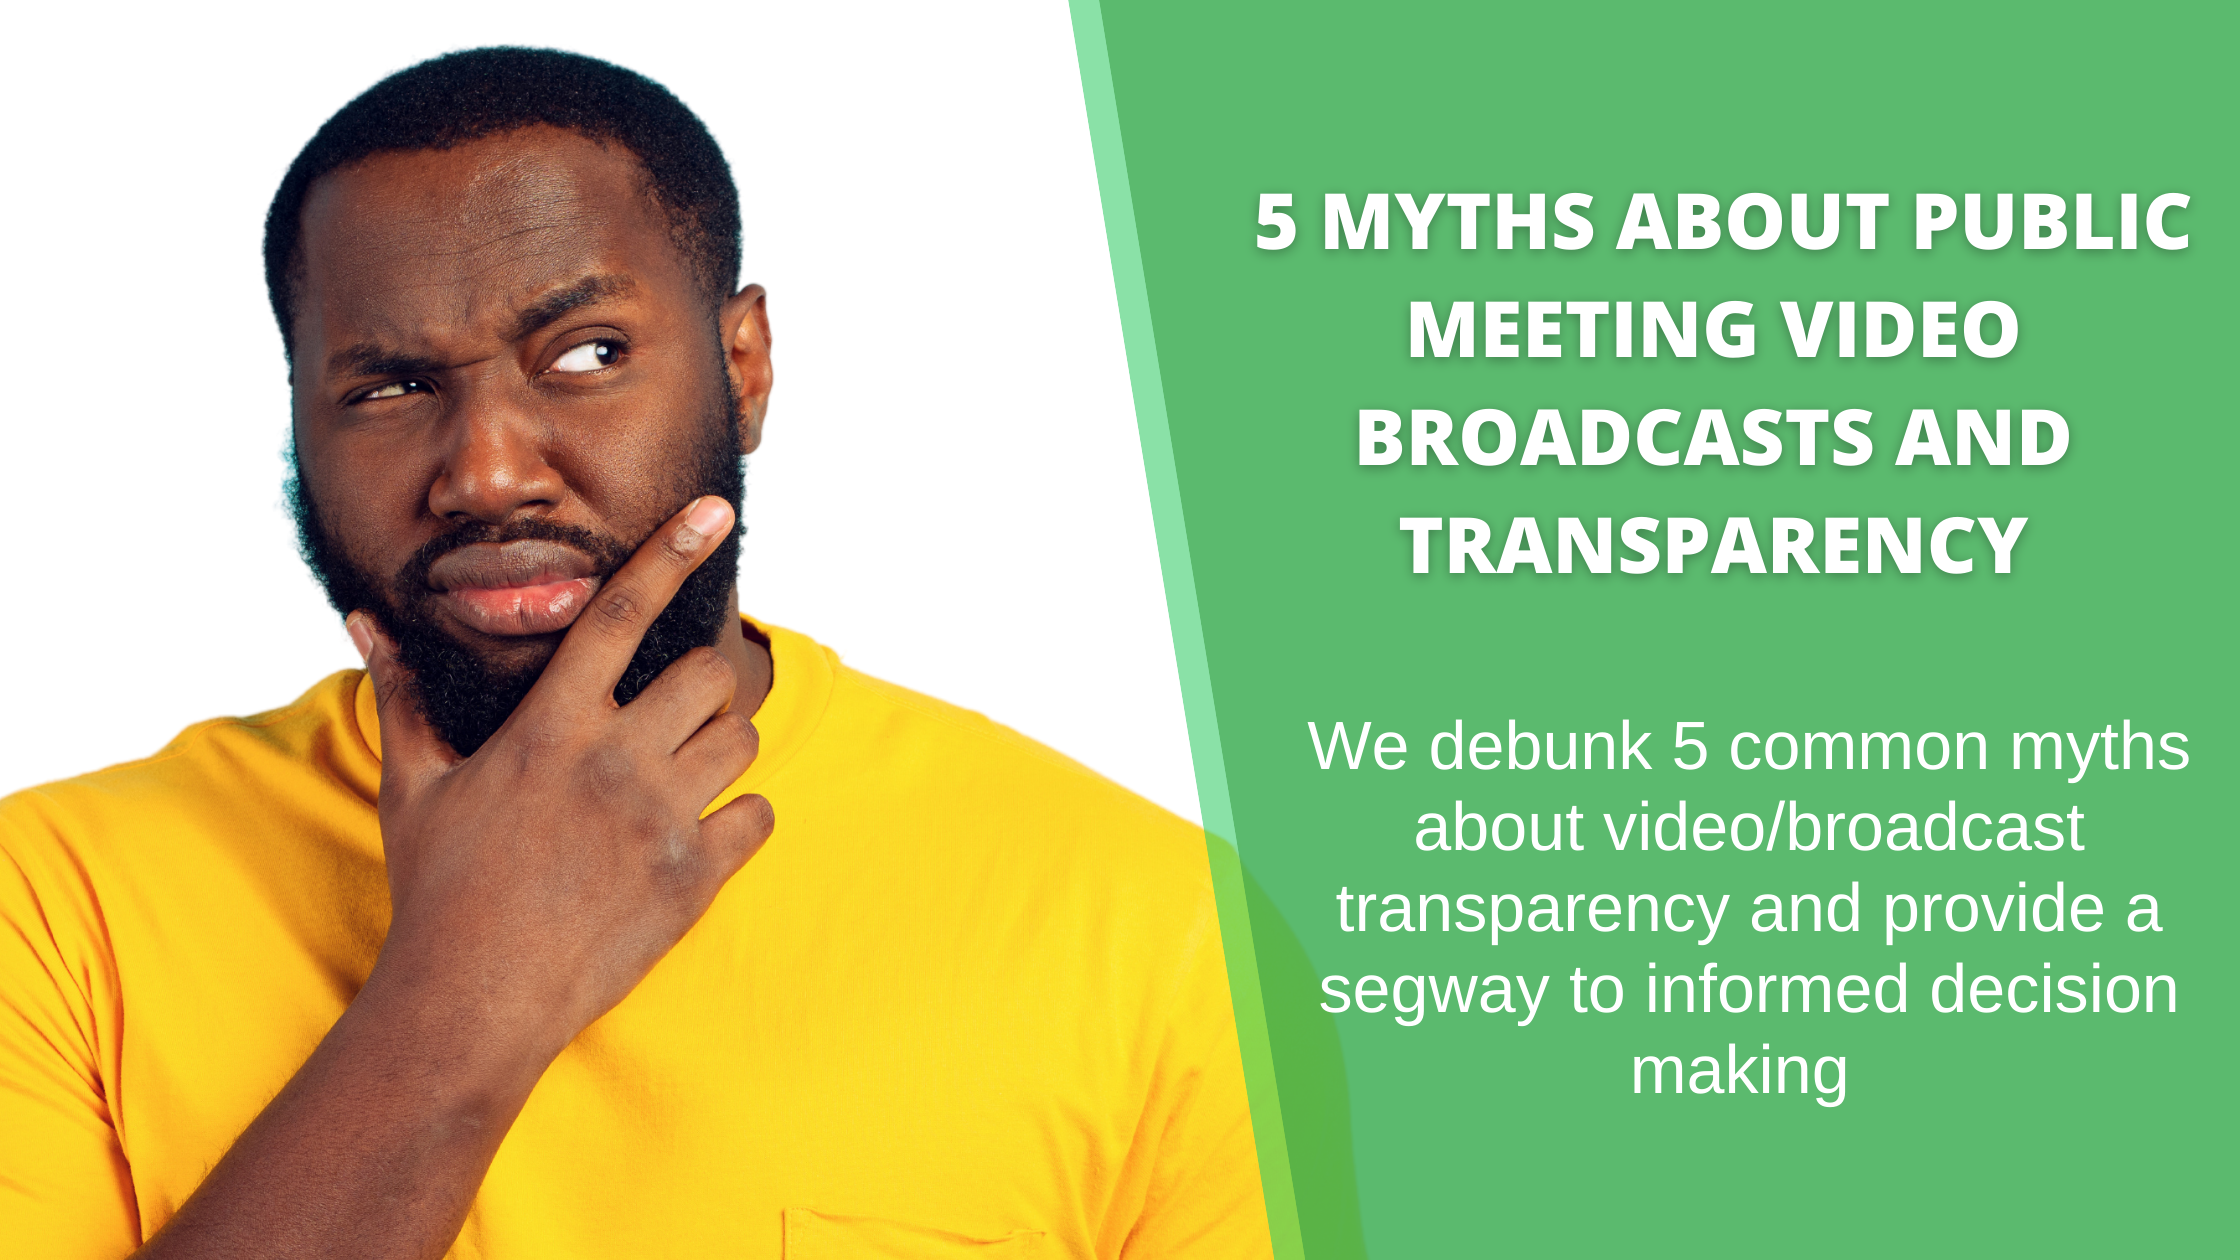 5 Myths about Public Meeting Video Broadcasts and Transparency